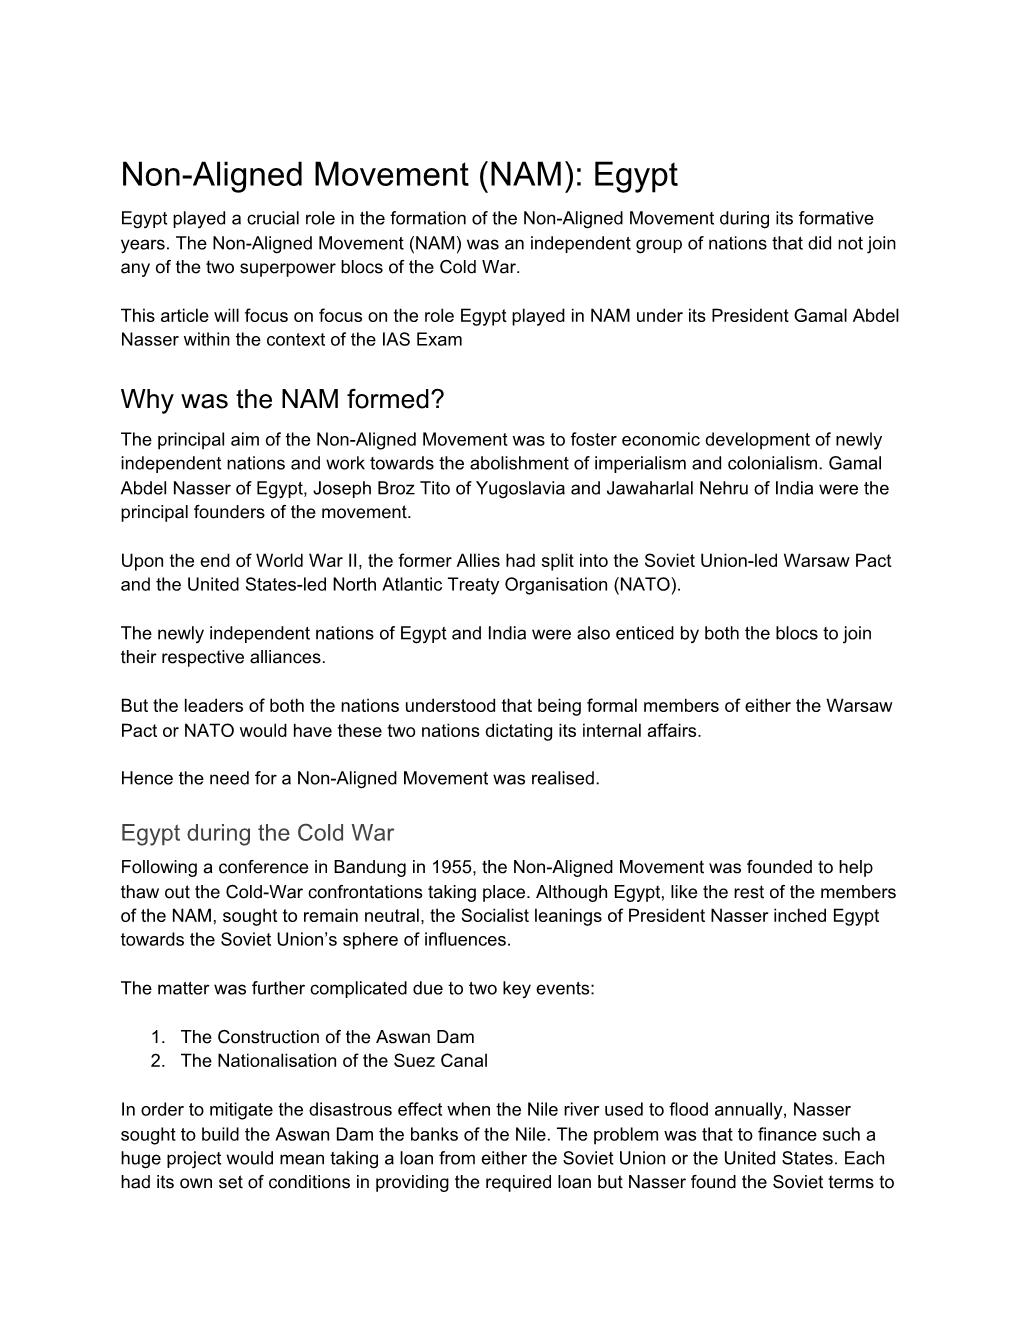 Non-Aligned Movement (NAM): Egypt Egypt Played a Crucial Role in the Formation of the Non-Aligned Movement During Its Formative Years